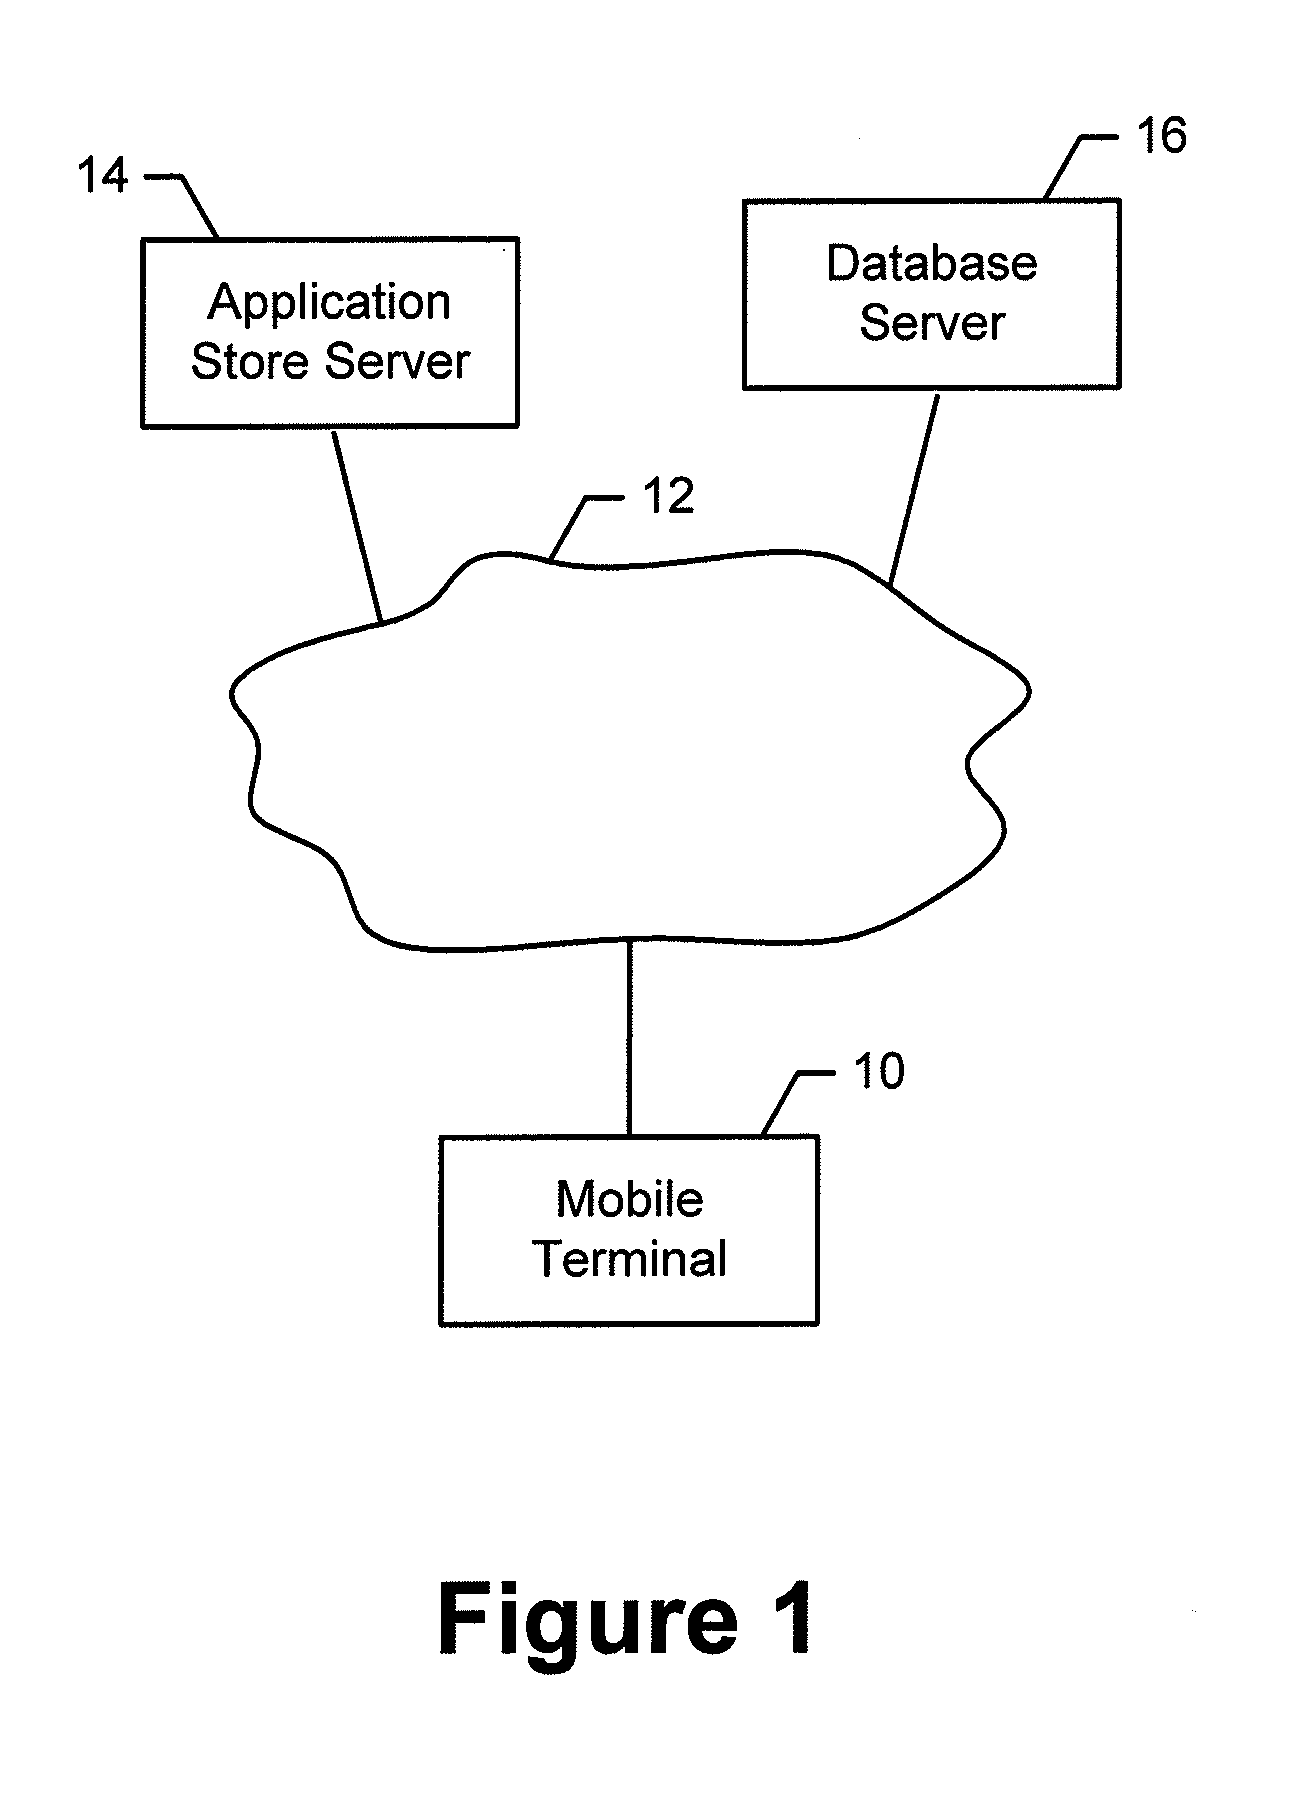 Method and apparatus for providing consumption information for software applications